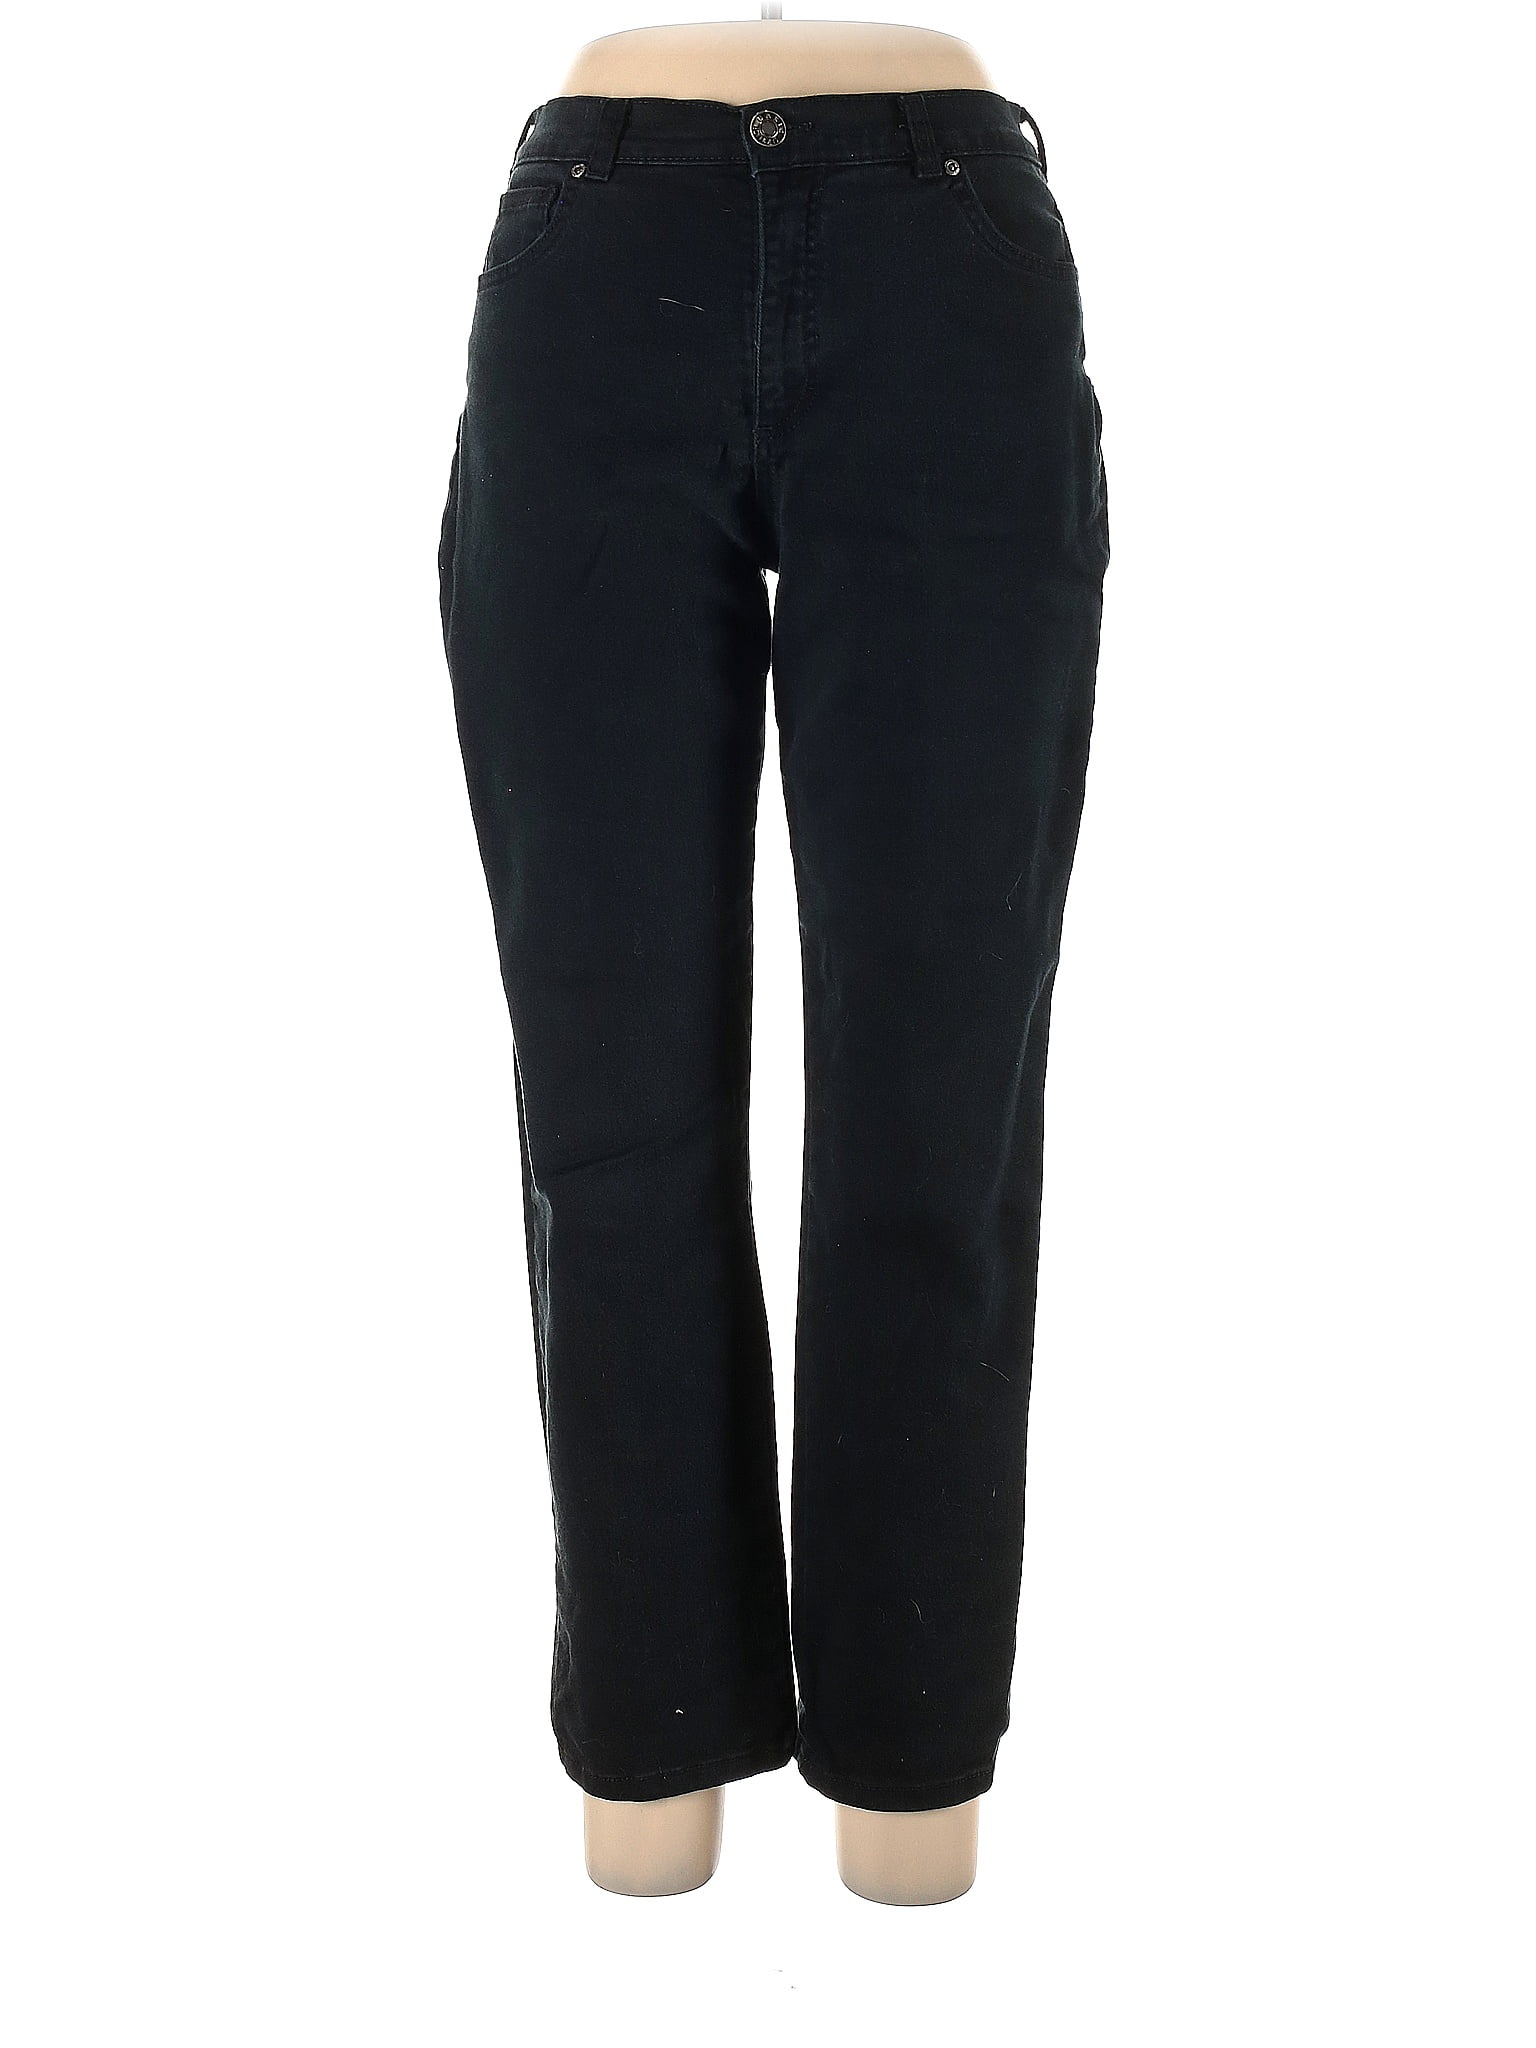 Basic Editions Solid Black Jeans Size 10 - 48% off | thredUP